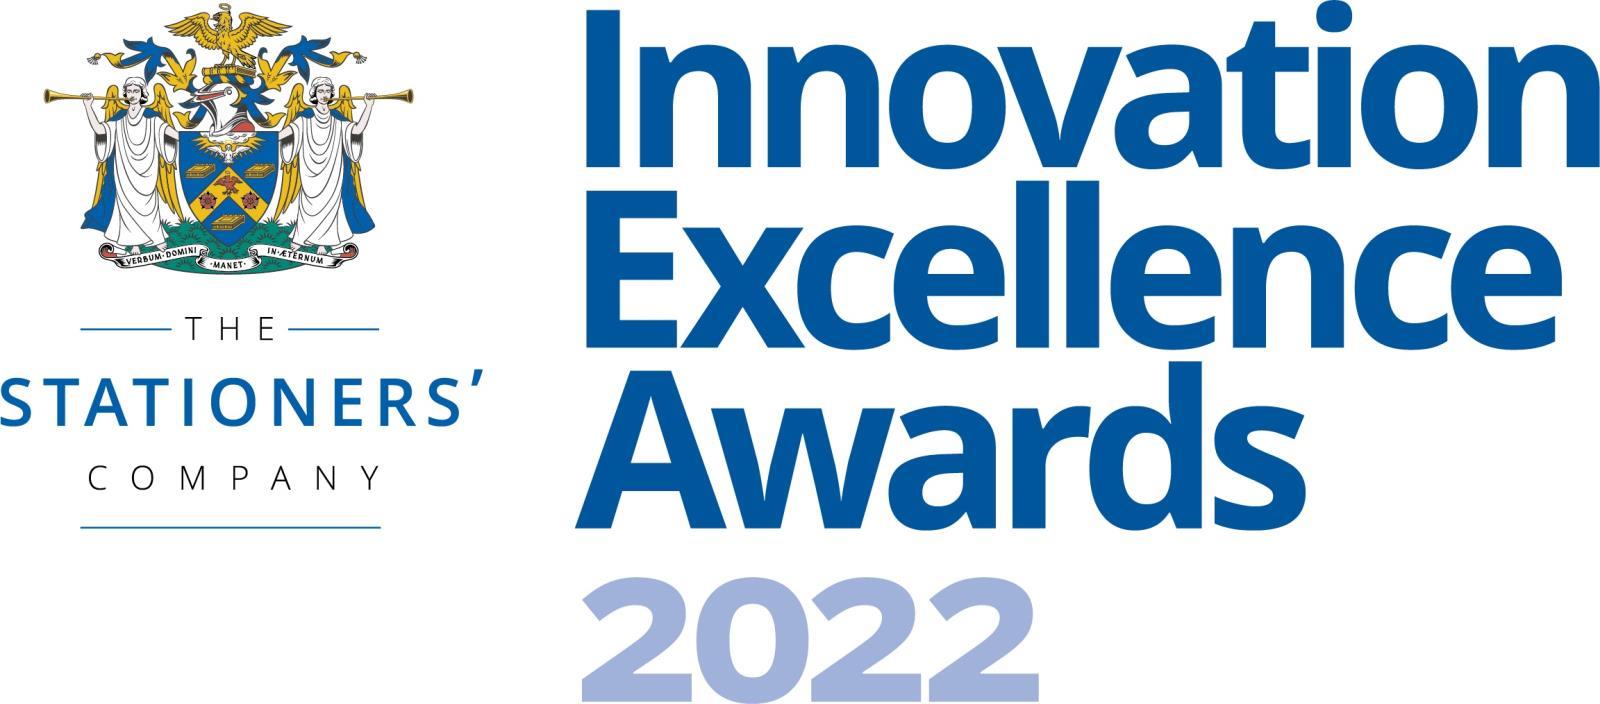 Innovation Excellence Awards Lunch 2022